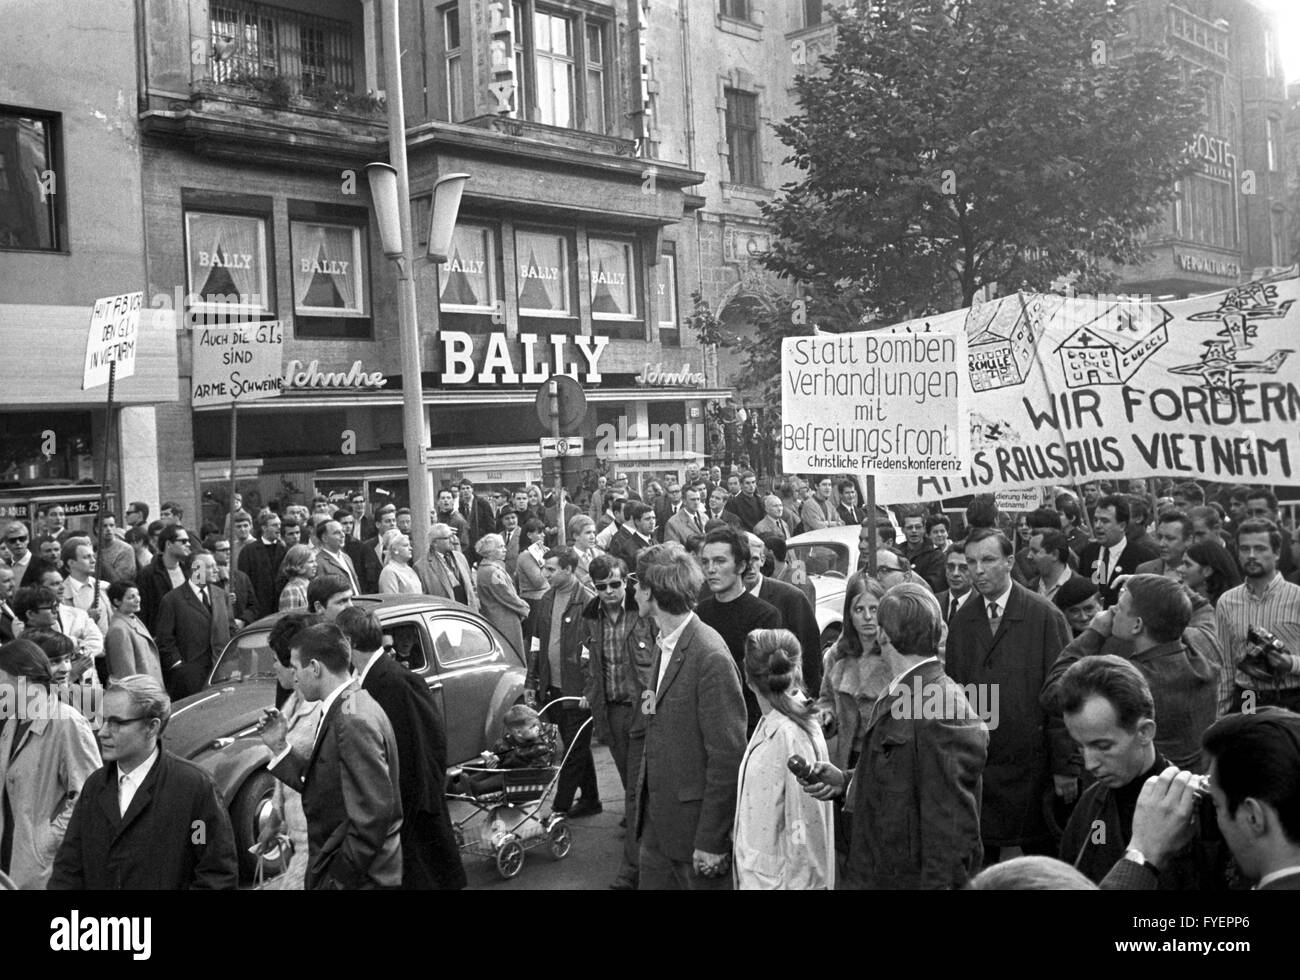 Demonstration march at Kurfuerstendamm. About 30 groups, mainly student organisations, demonstrate against US policitcs and Vietnam War on 21 October 1967 in Berlin. Stock Photo